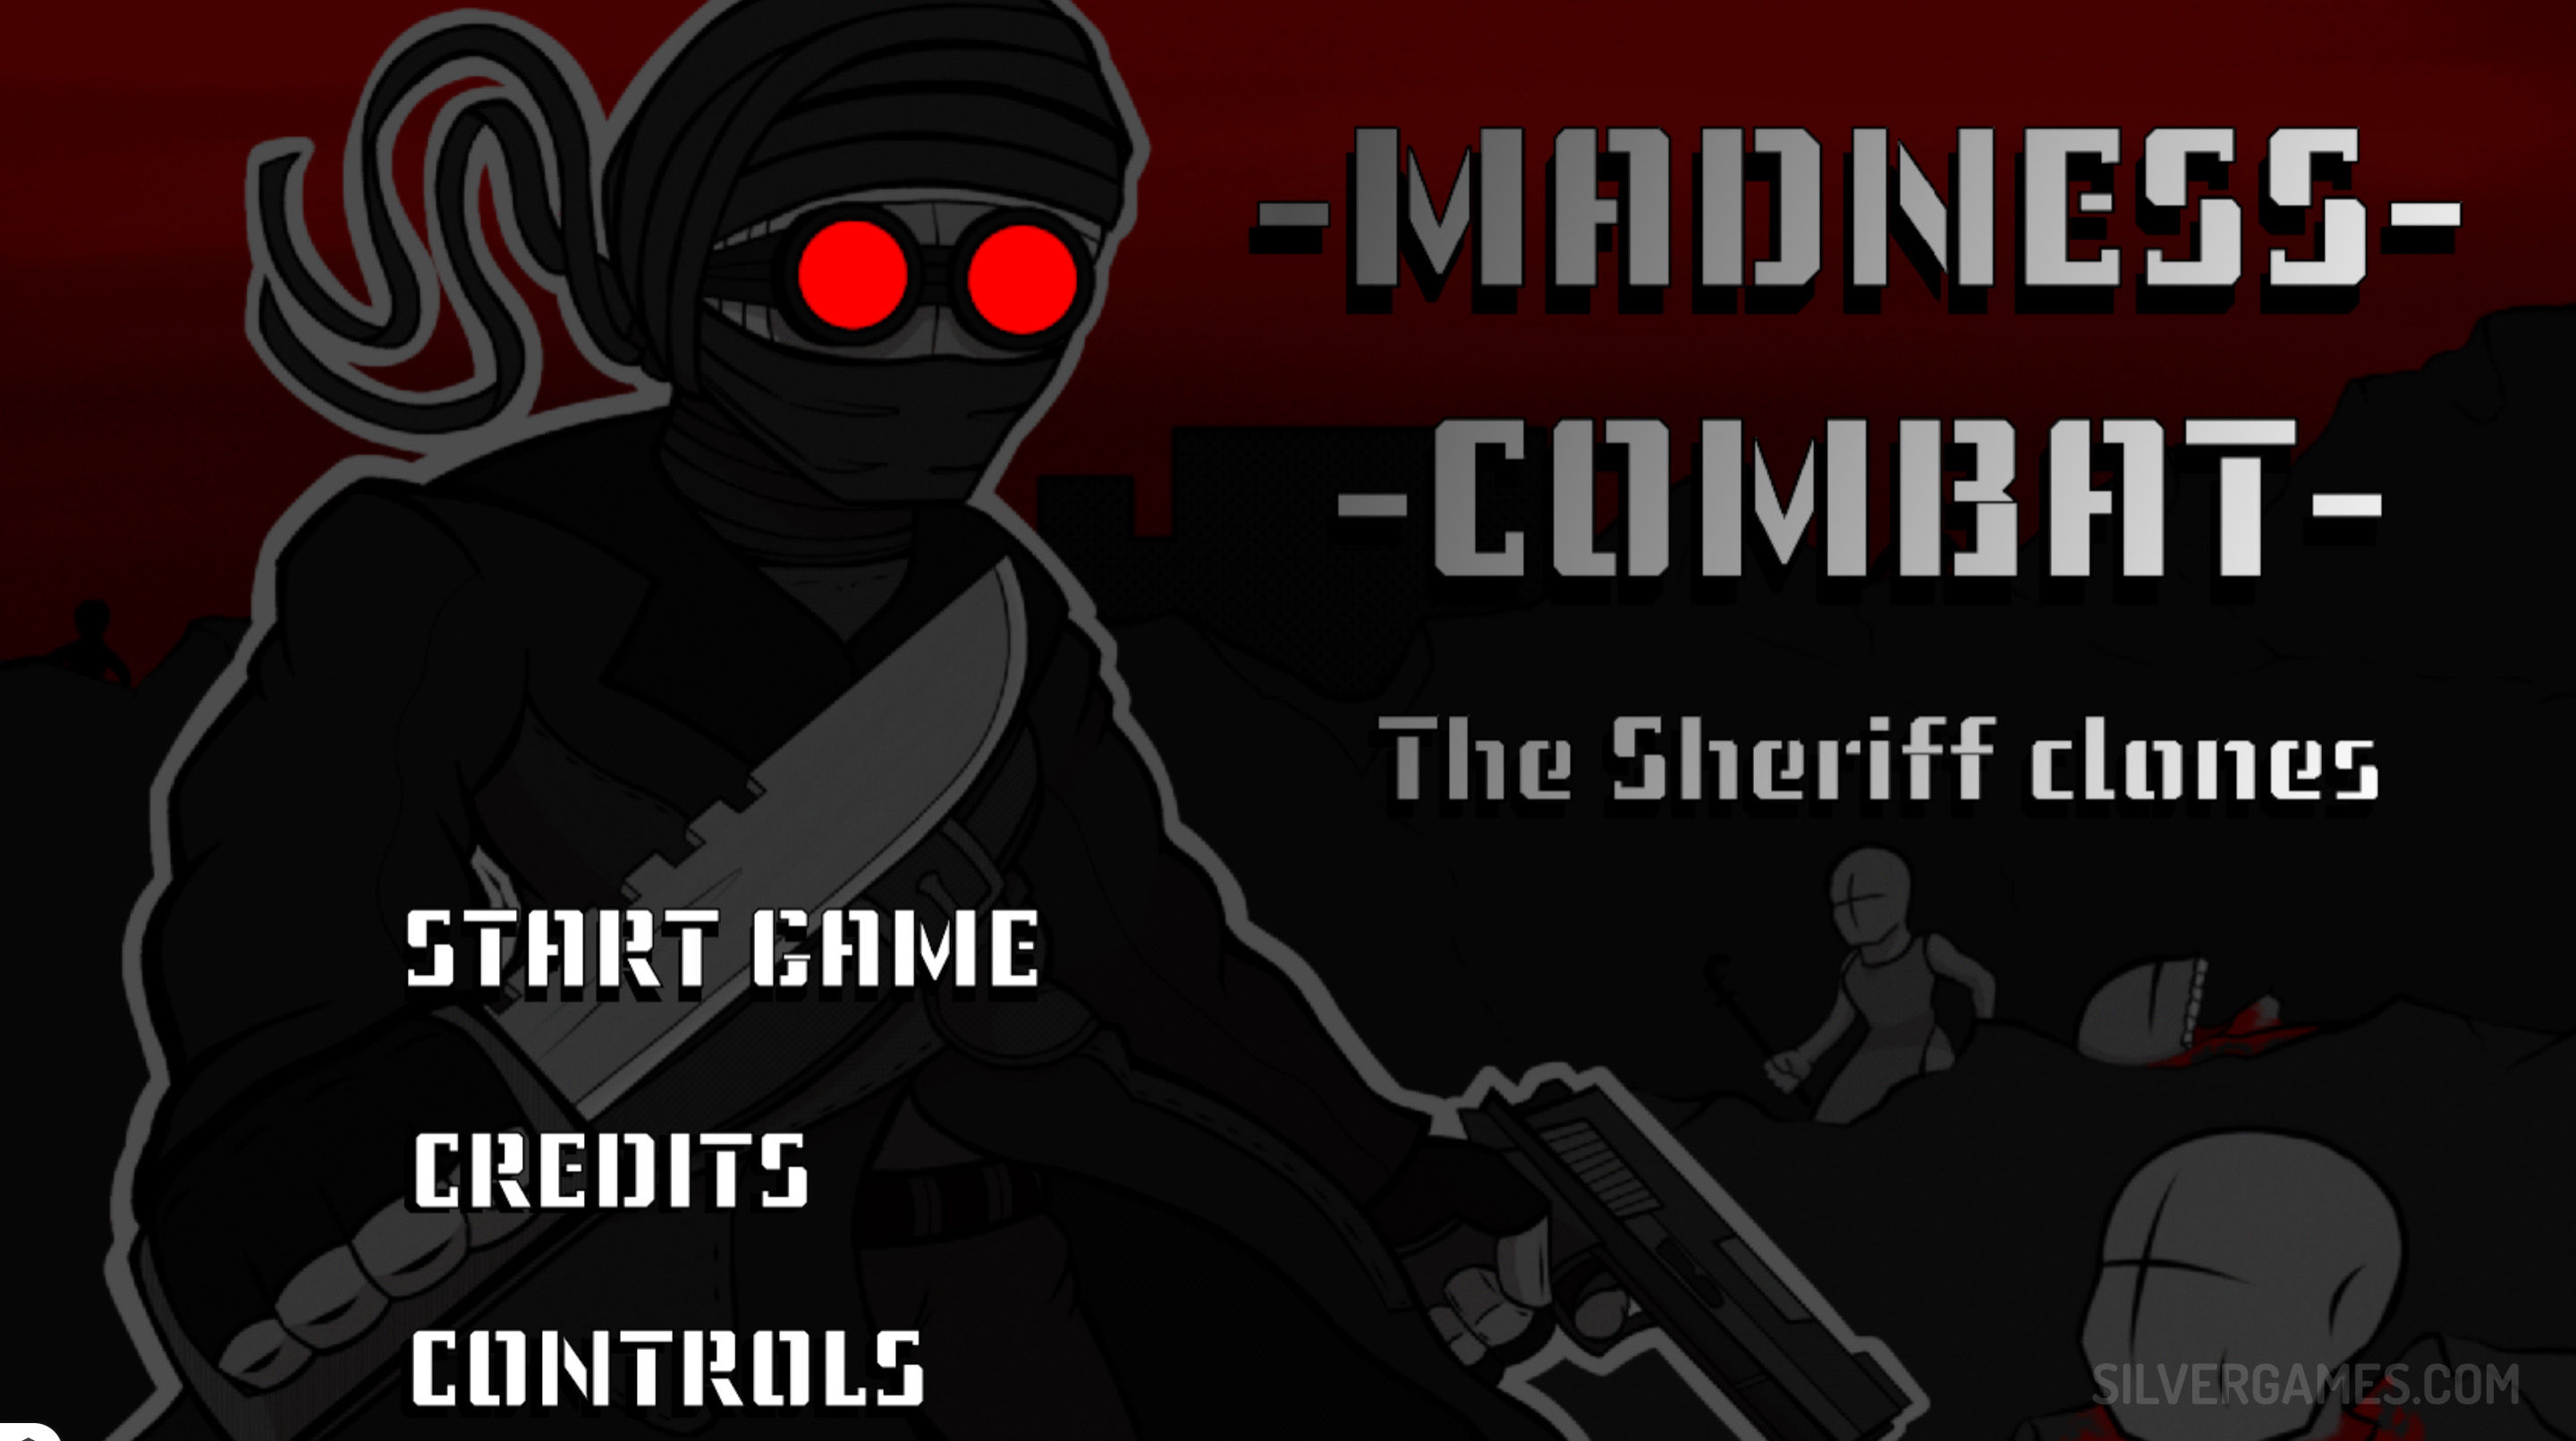 MADNESS COMBAT: THE SHERIFF CLONES free online game on